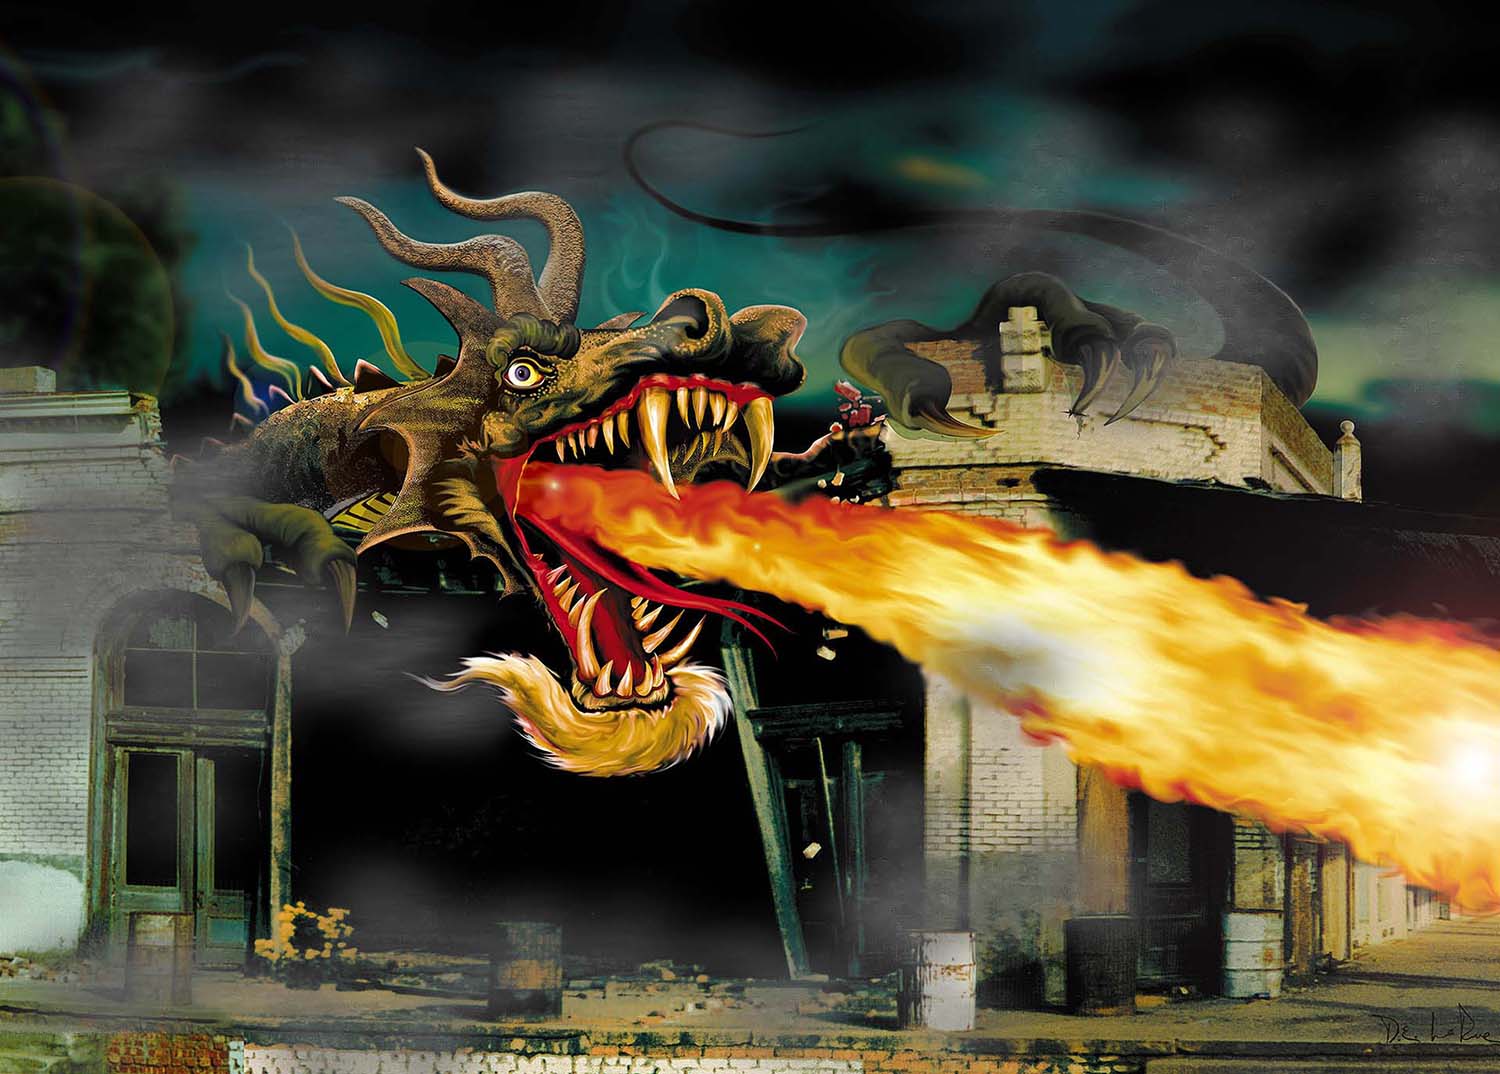 Barton the Mutant Salamander is a dragon ripping through a building and breathing fire by Doug LaRue